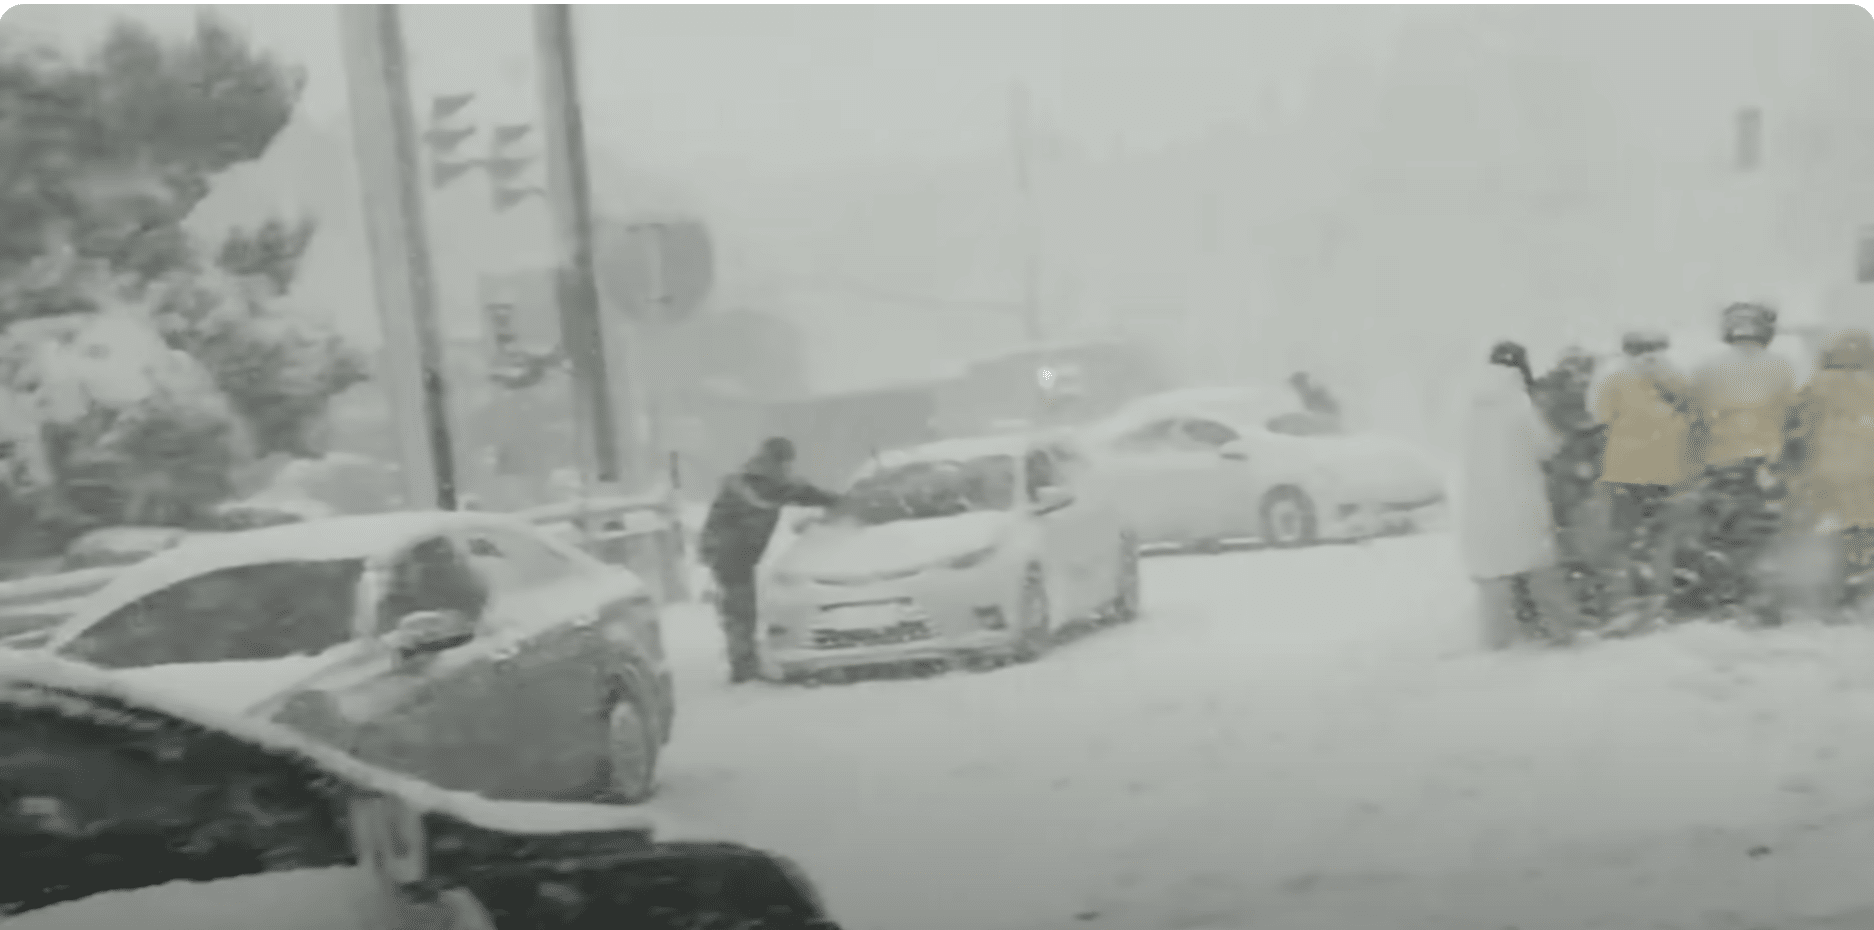 (WATCH) China is experiencing the largest blizzard ever recorded